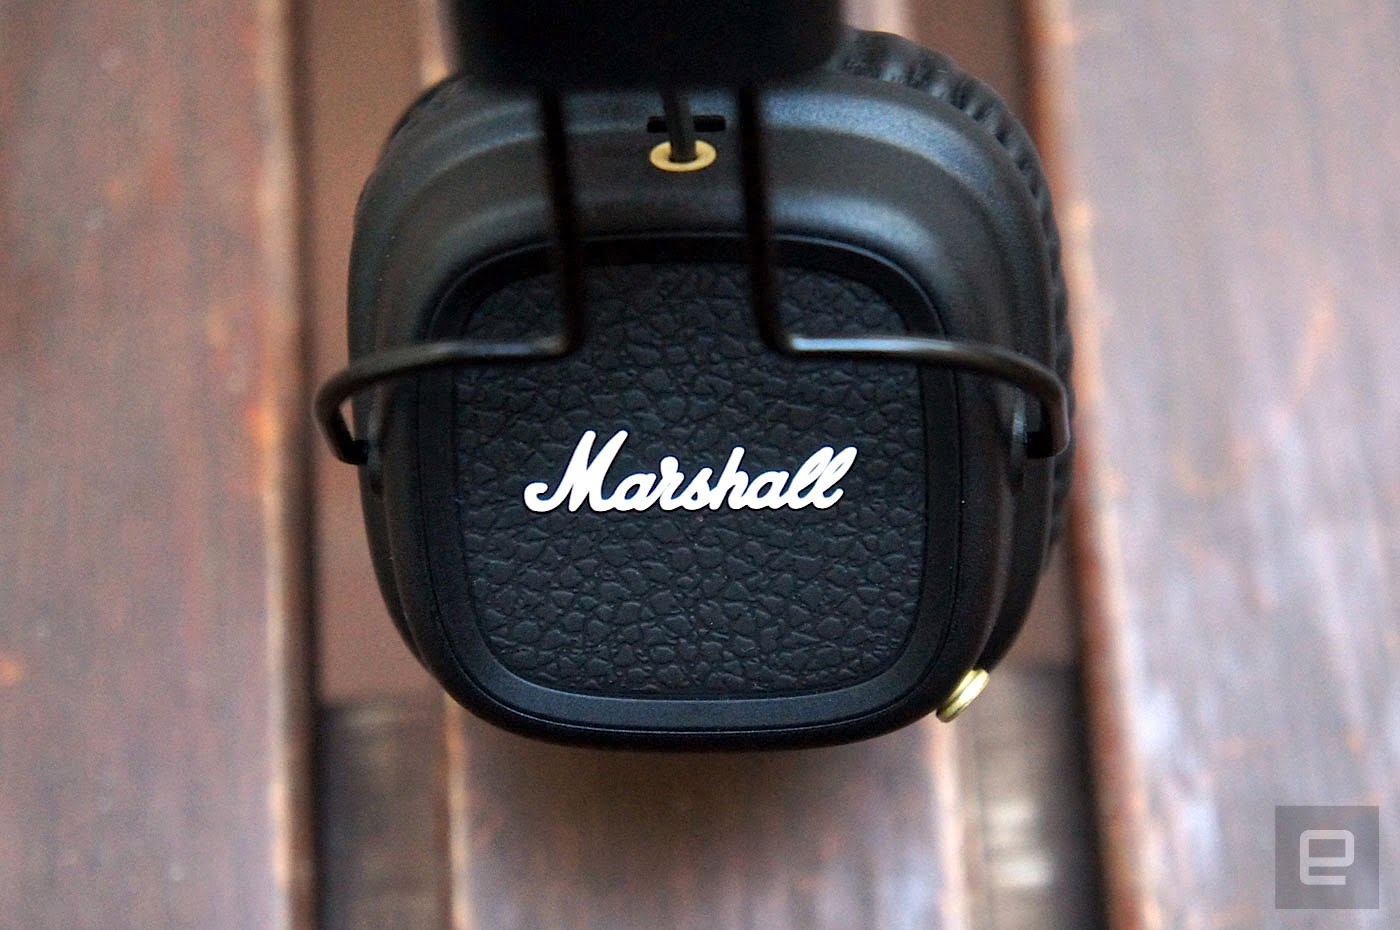 Marshall’s wireless headphones rock all night (and day) long